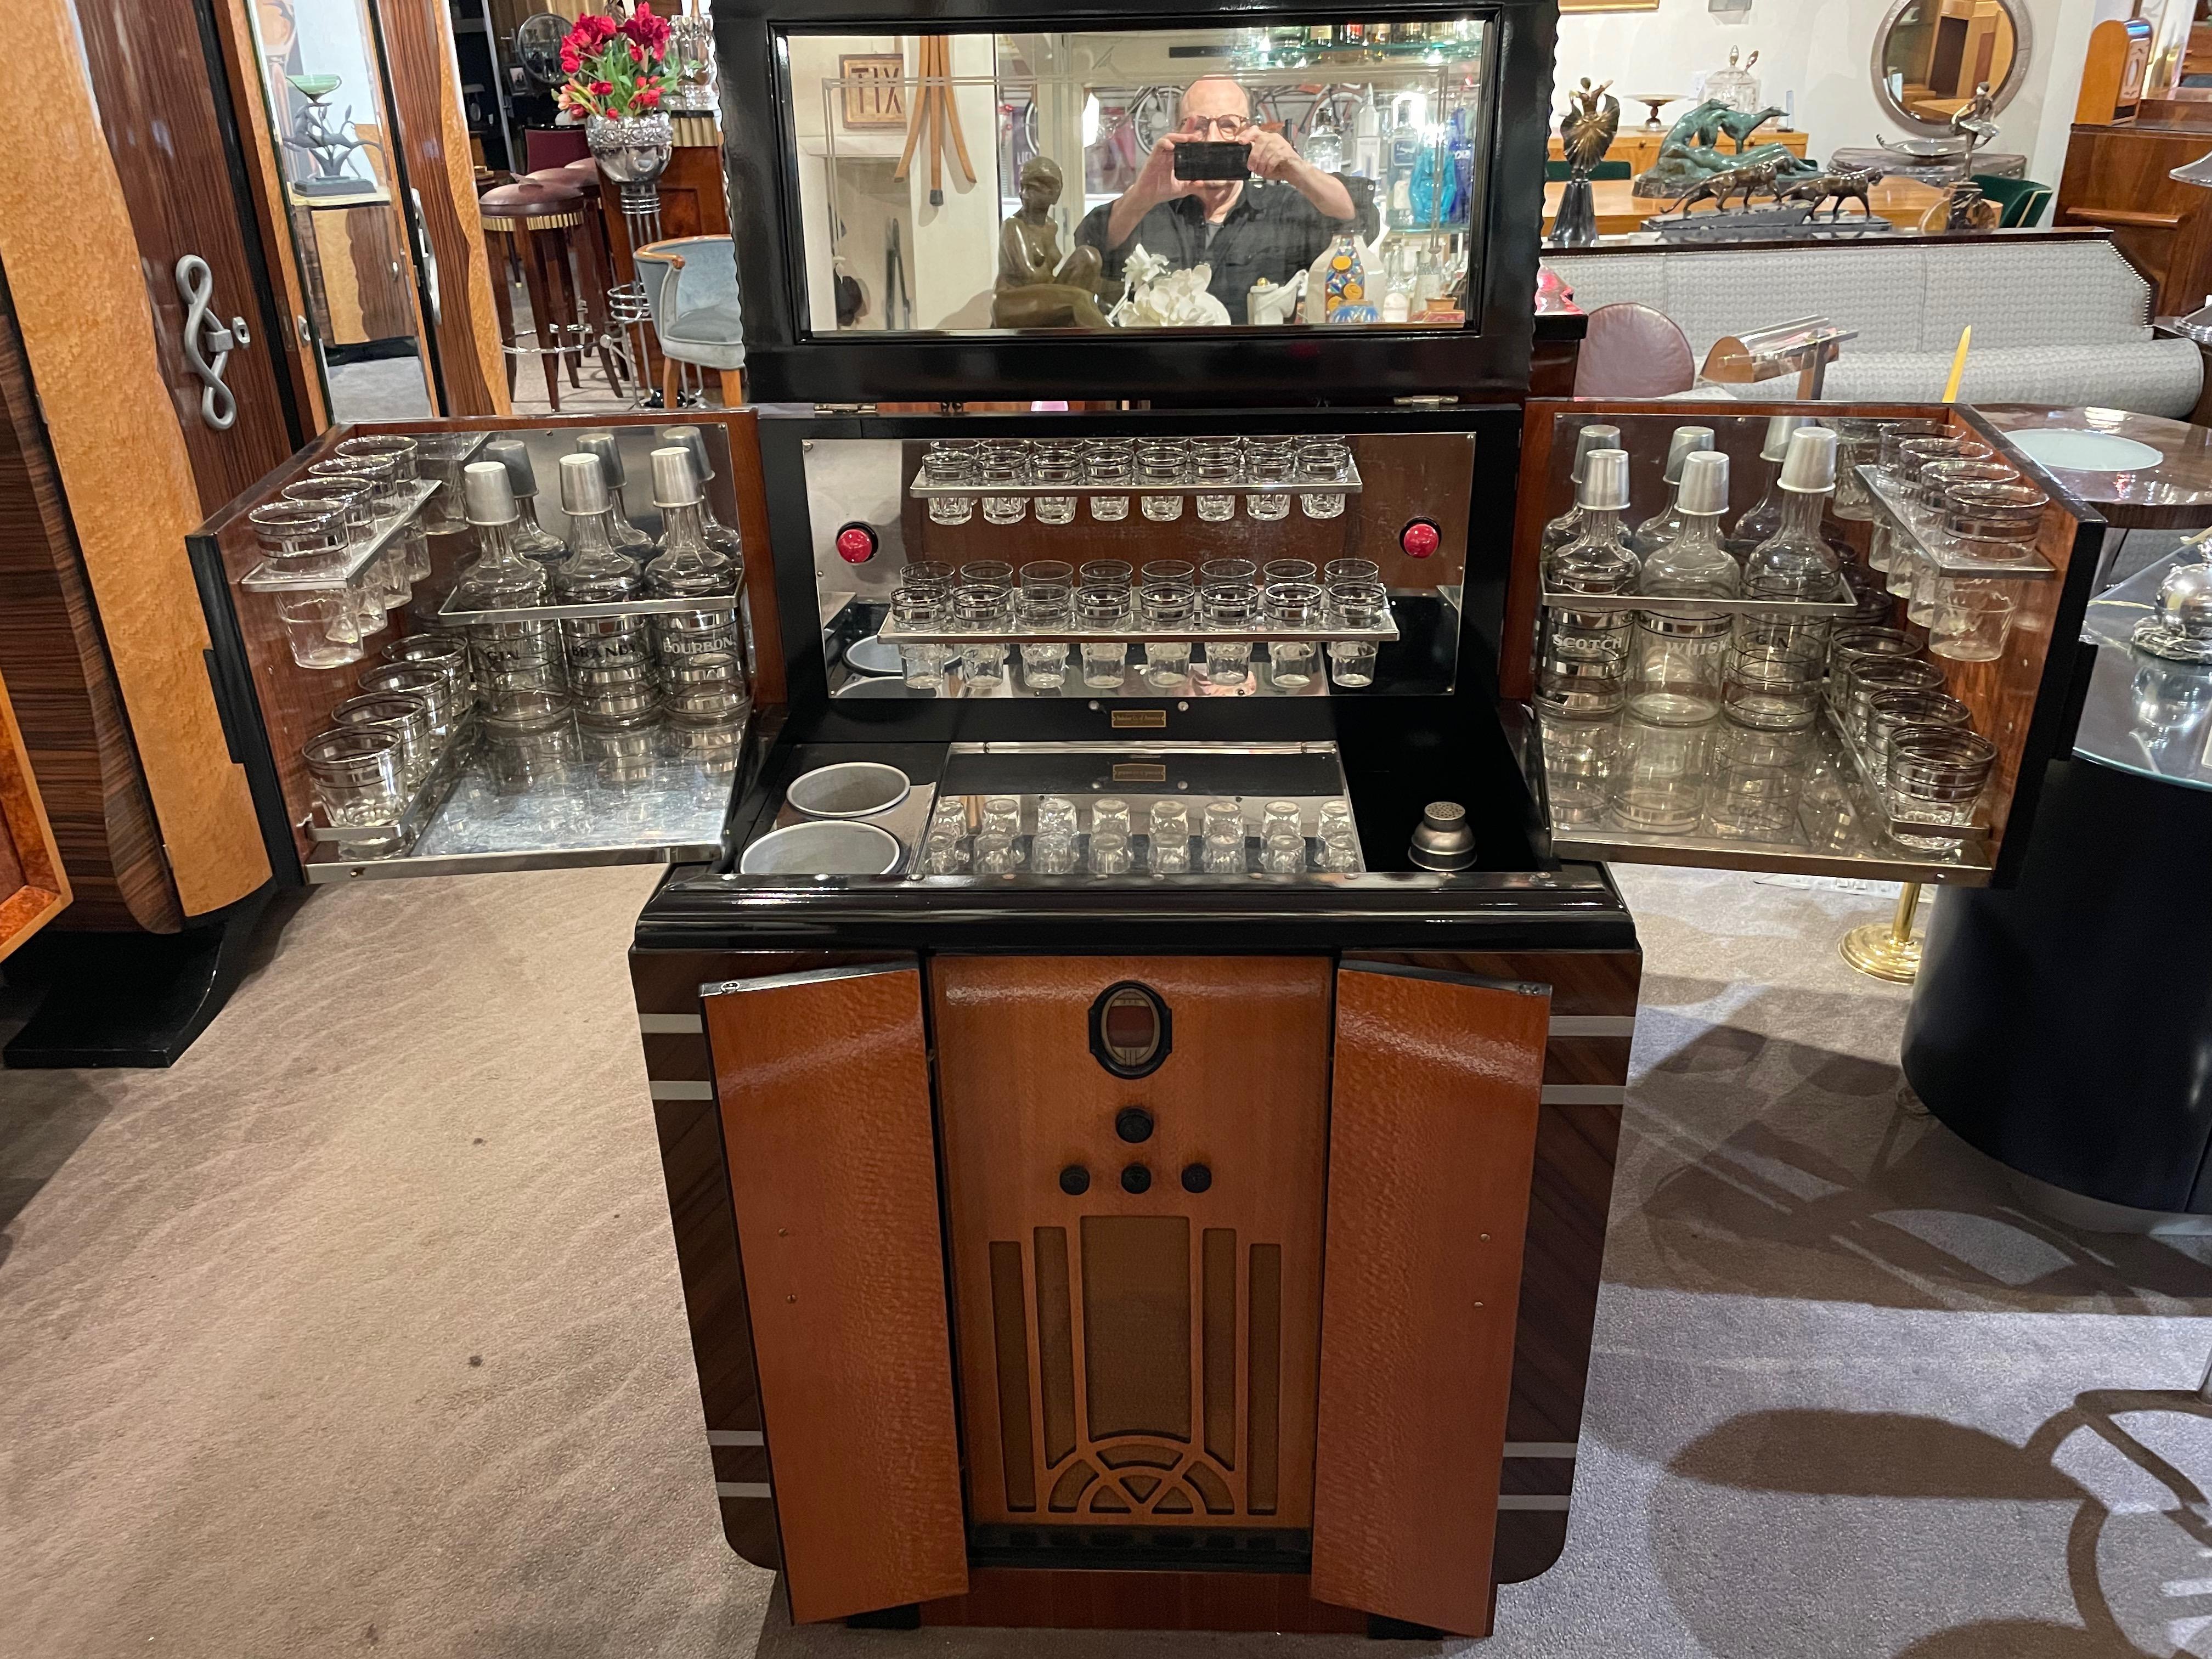 Art Deco Philco Radio Bar is one of the most highly sought-after pieces by radio and bar enthusiasts alike. Created originally during the Prohibition Era, a time of fascination with hidden and secret liquor bars, it reached a high point with its